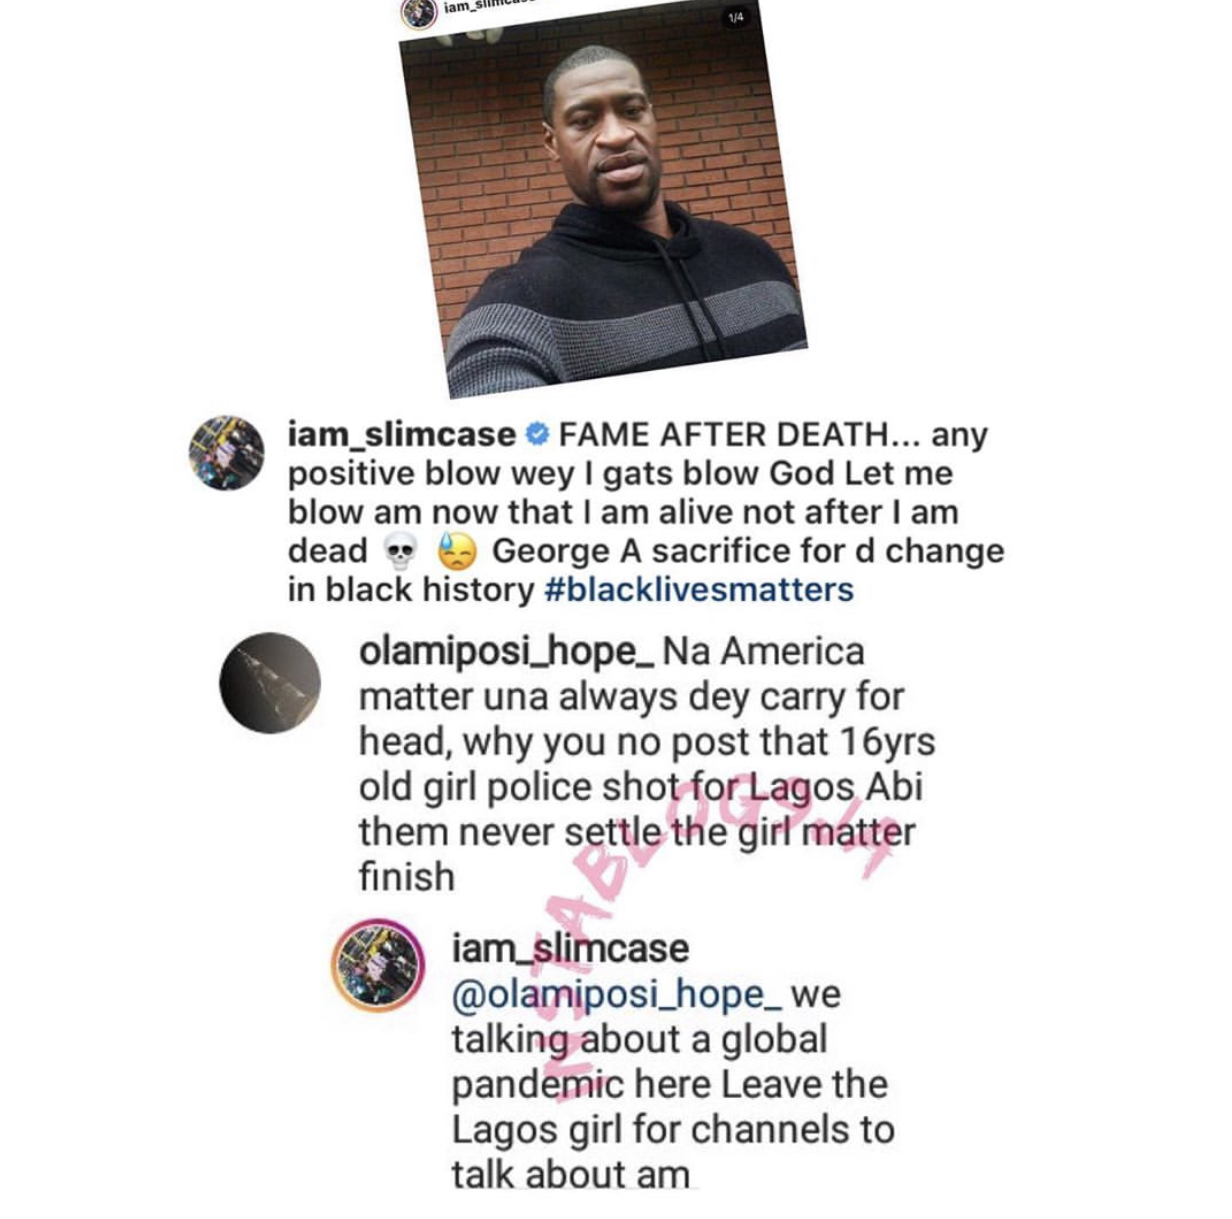 The rapper’s comment on the issue